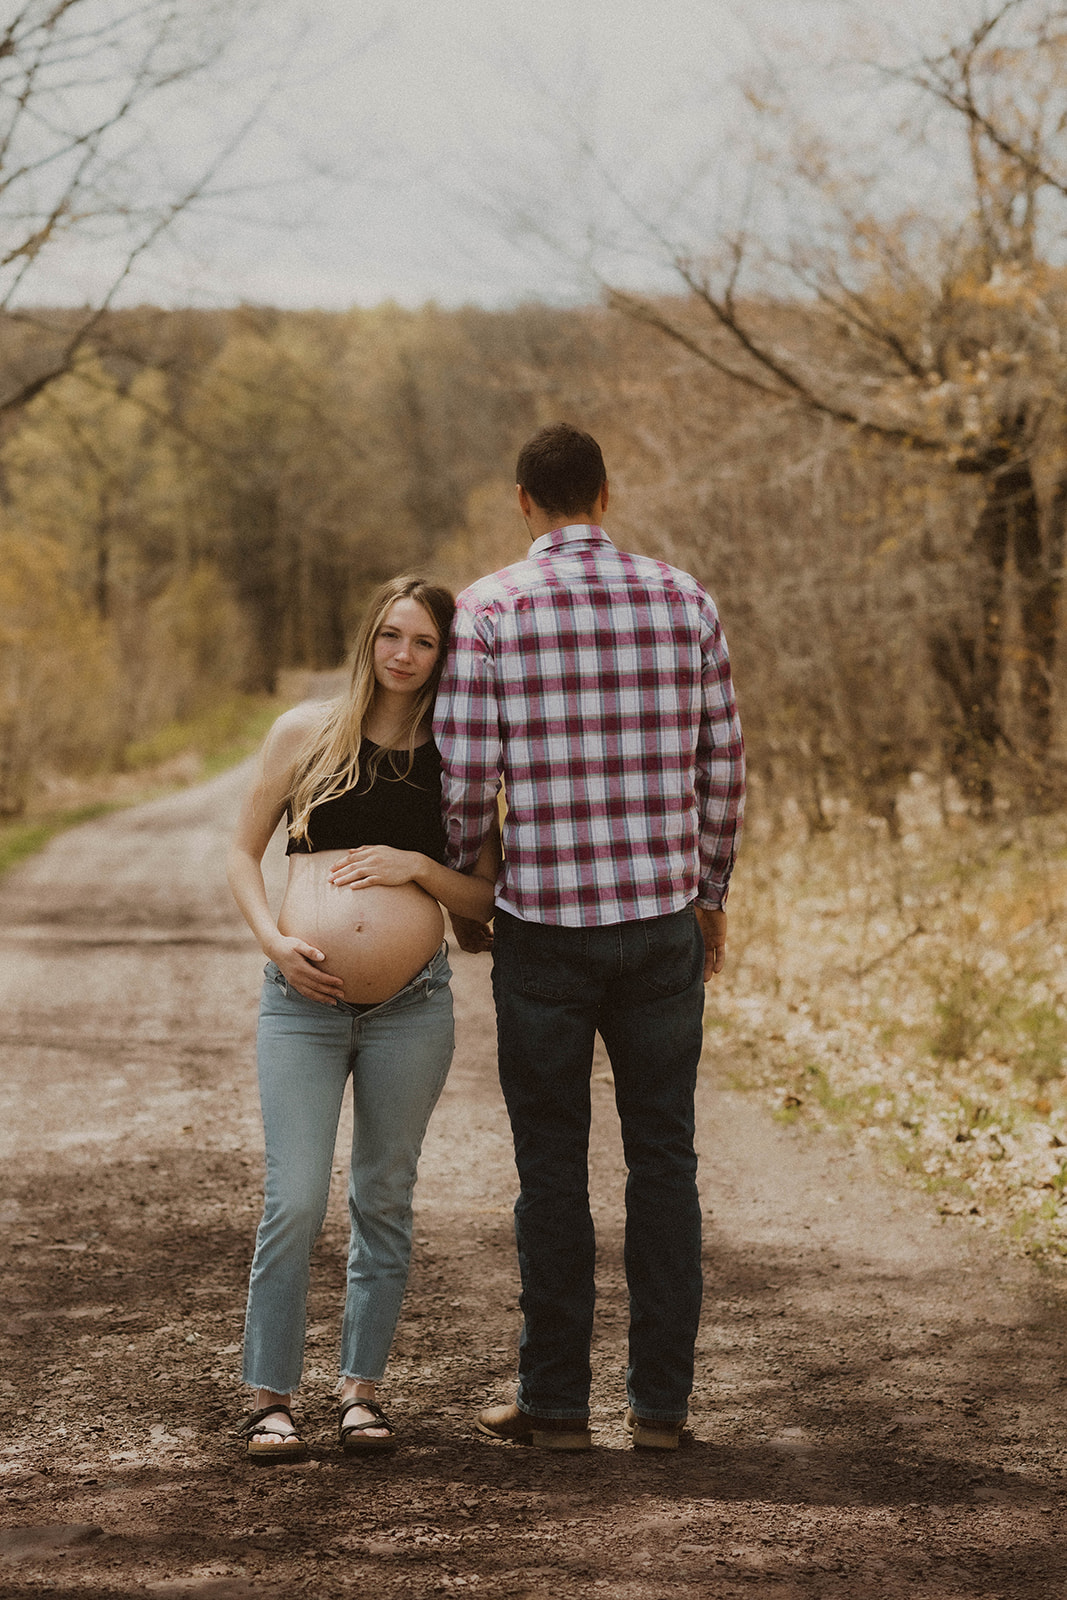 Future parents pose intimately together on a road 